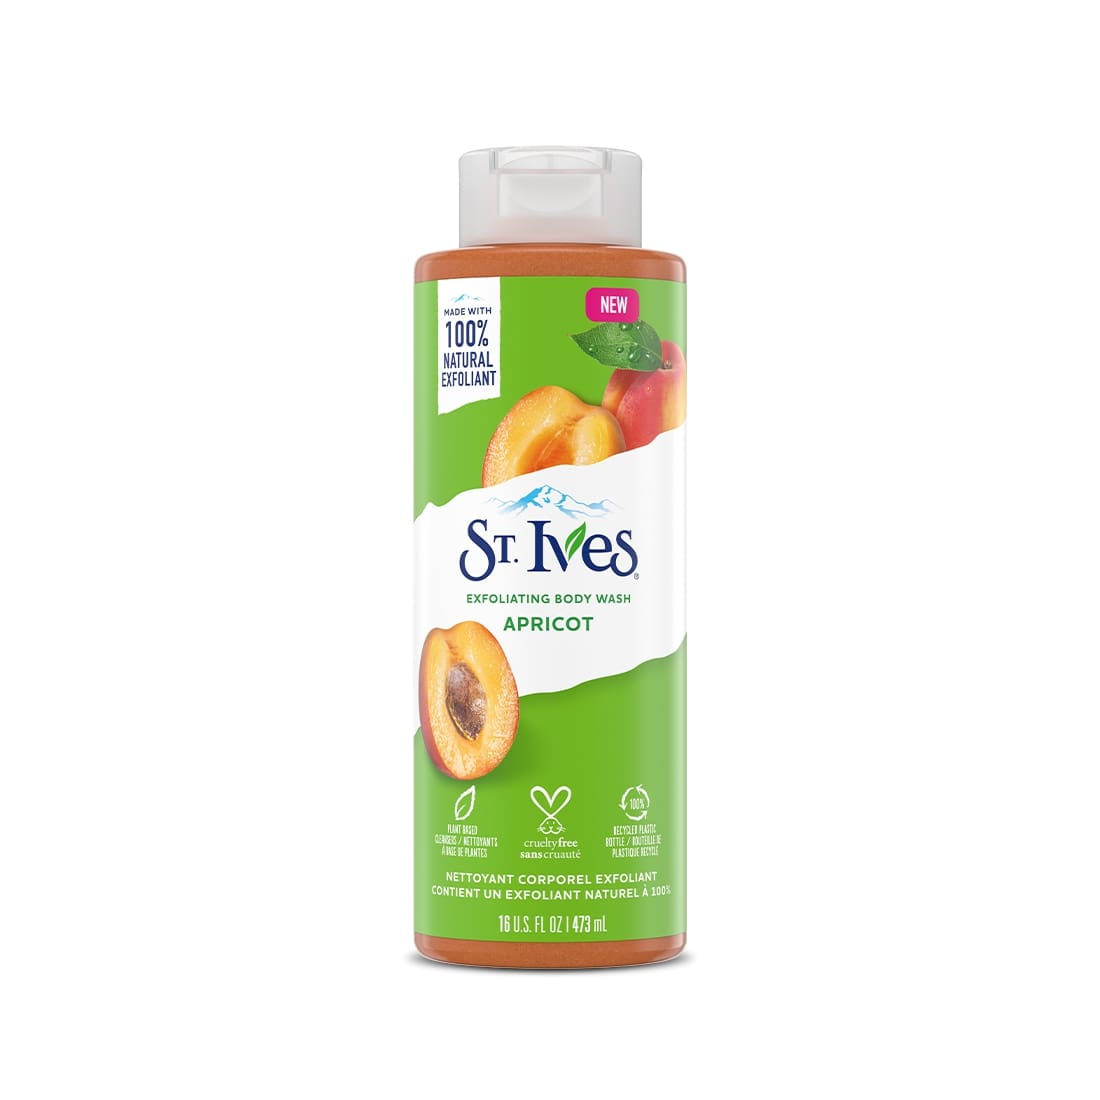 St. Ives Exfoliating Apricot Flavour Body Wash, 473 ml, Pack of 1 